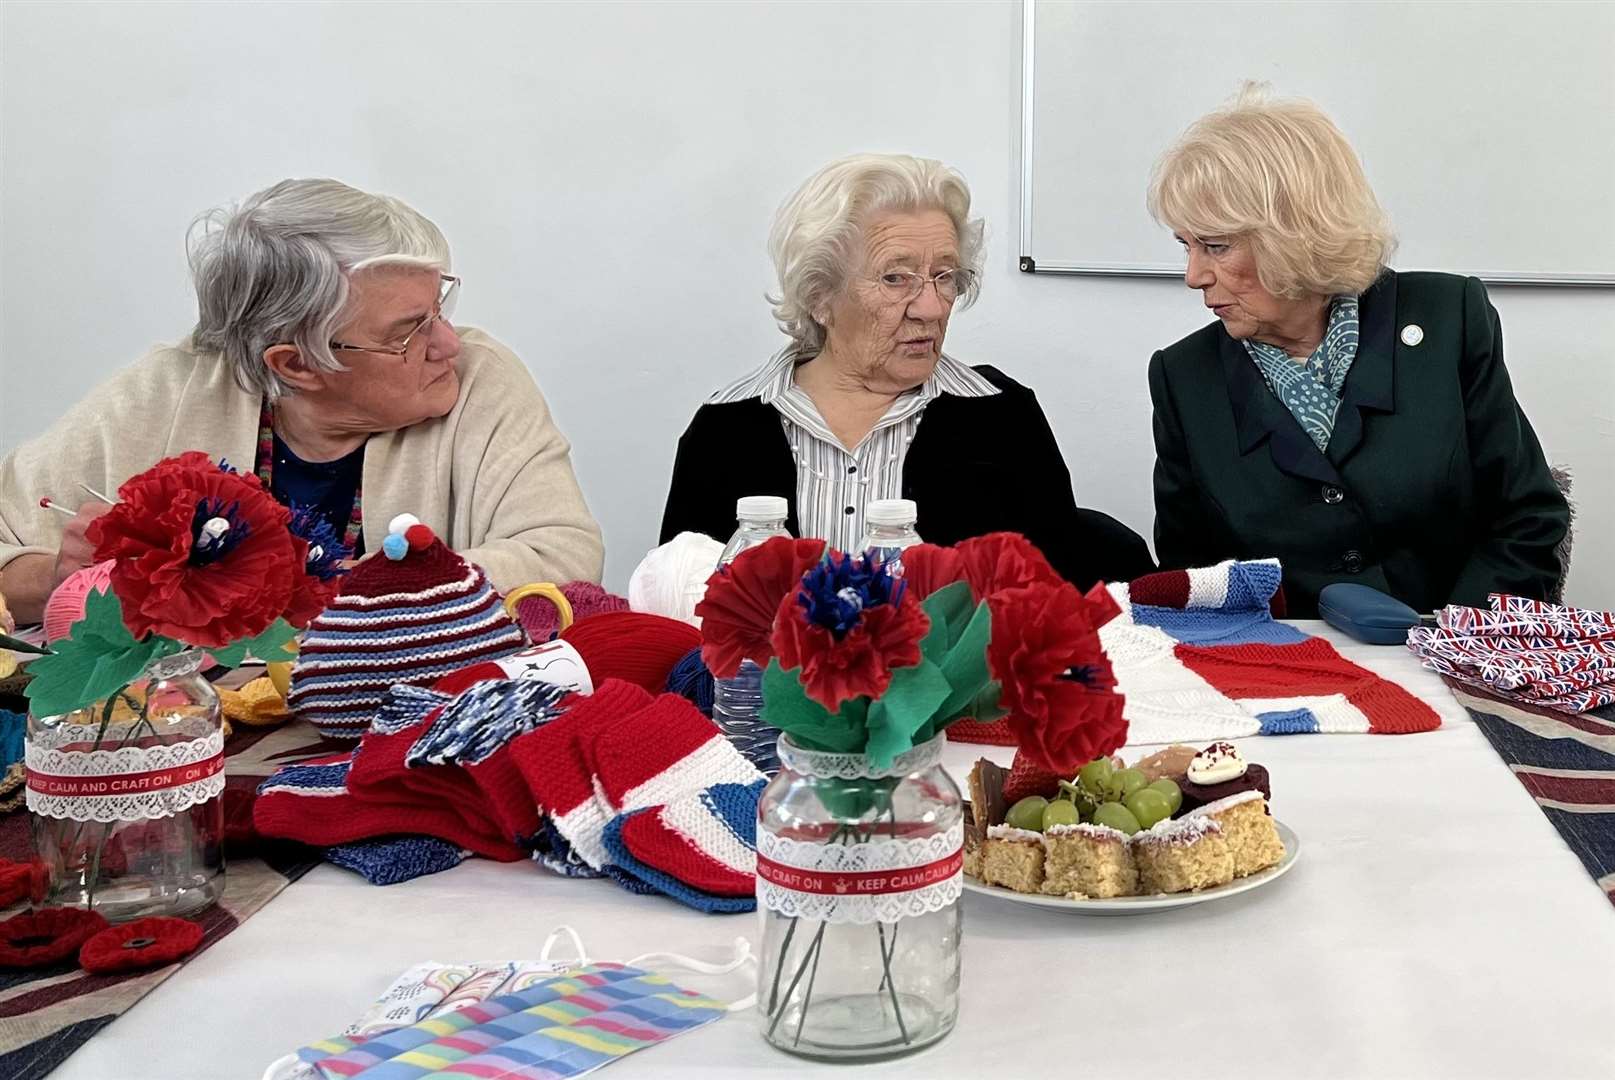 Yvonne Goodwin, Pearl Small and the Duchess of Cornwall talking about knitting at Sheerness Healthy Living Centre